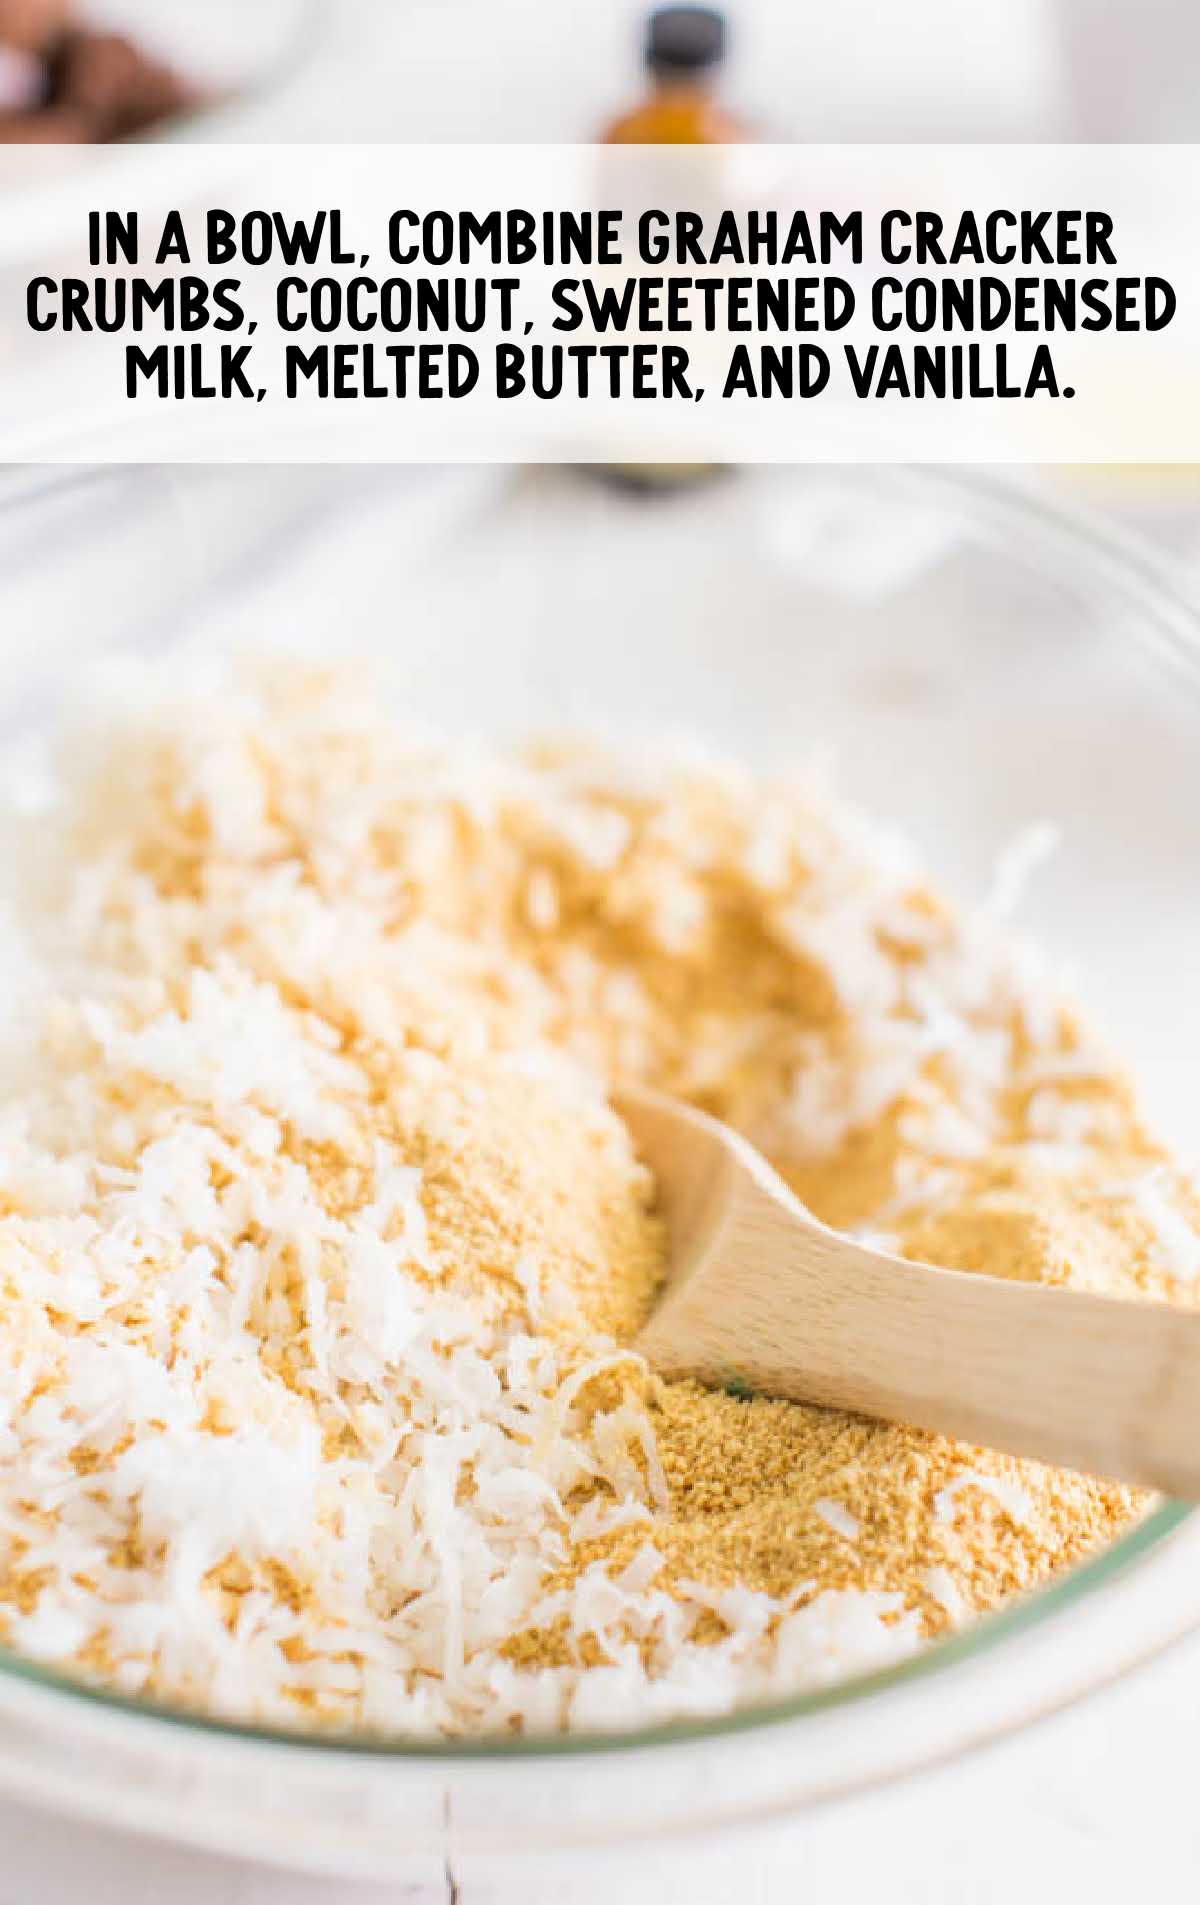 graham cracker crumbs, coconut, sweetened condensed milk, melted butter, and vanilla combined in a bowl